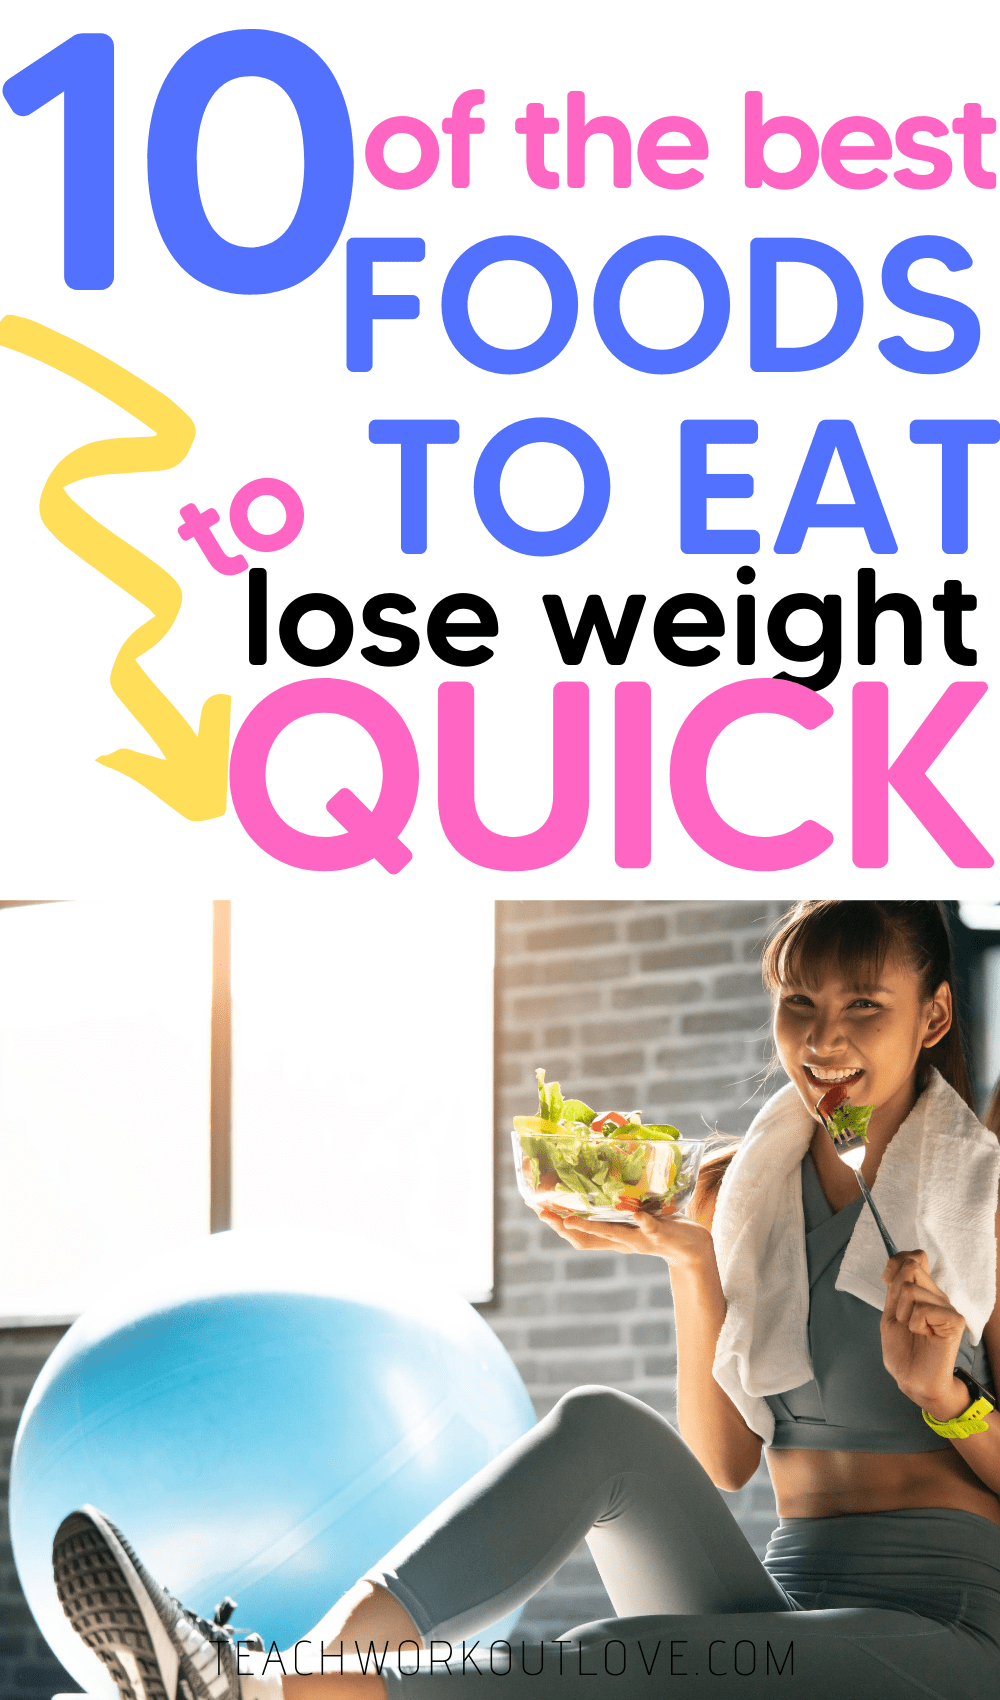 Want to find the right foods to eat to lose weight? Here's a list of 10 the best foods to eat to lose weight quick.